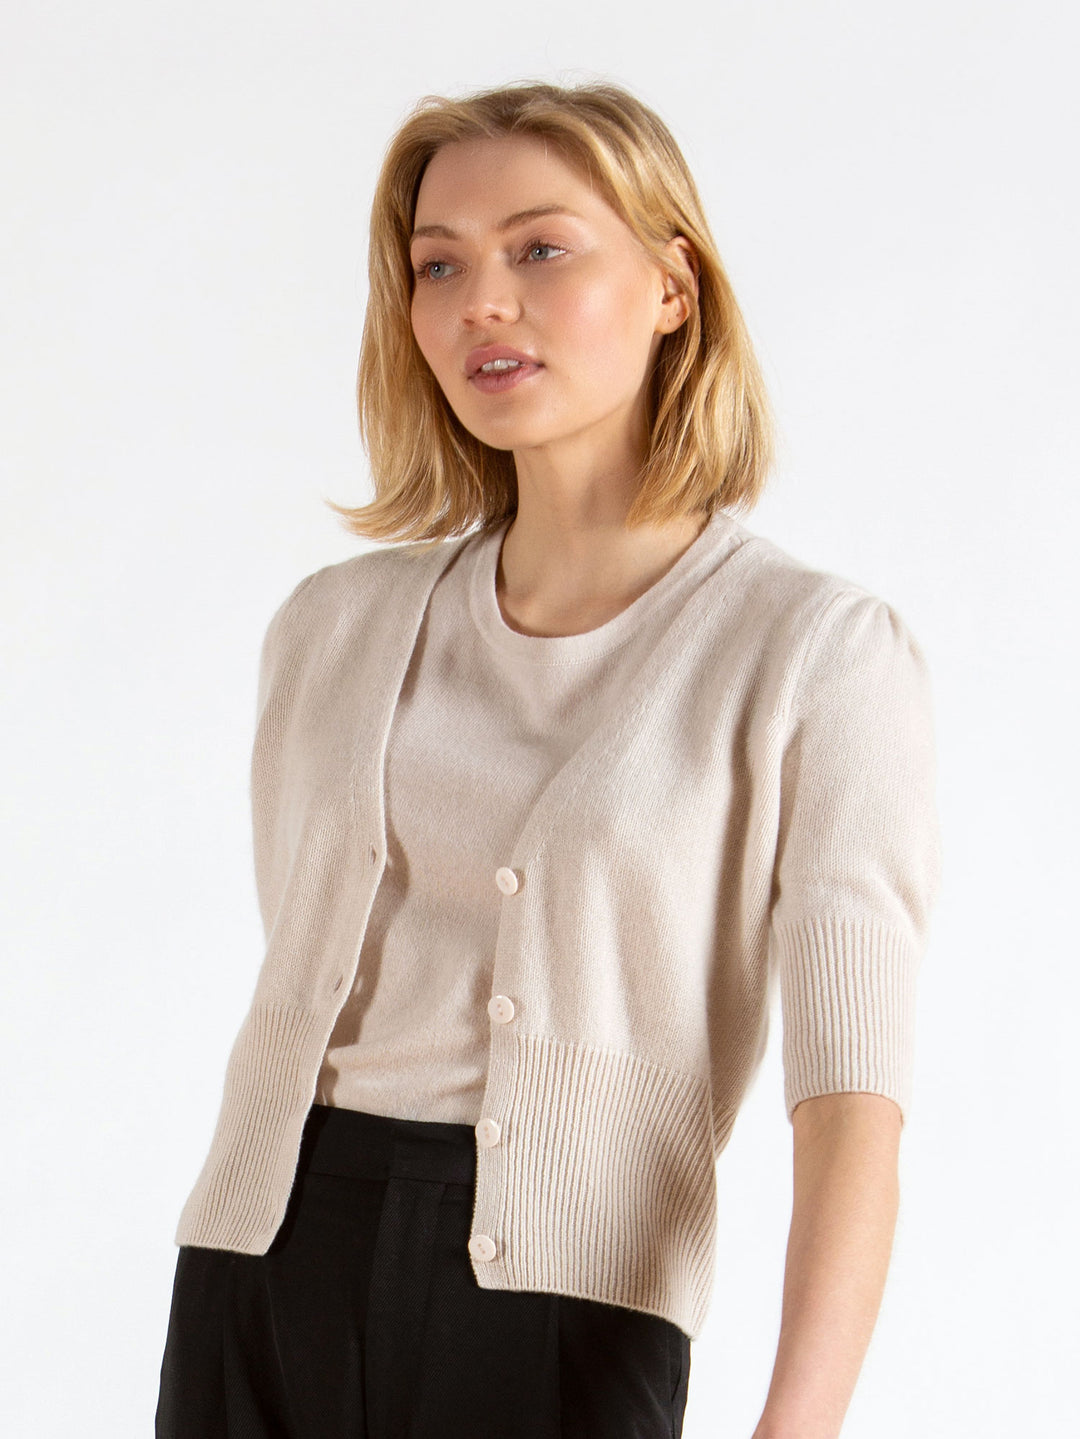 Cashmere cardigan Grace in 100% cashmere by Kashmina, pearl